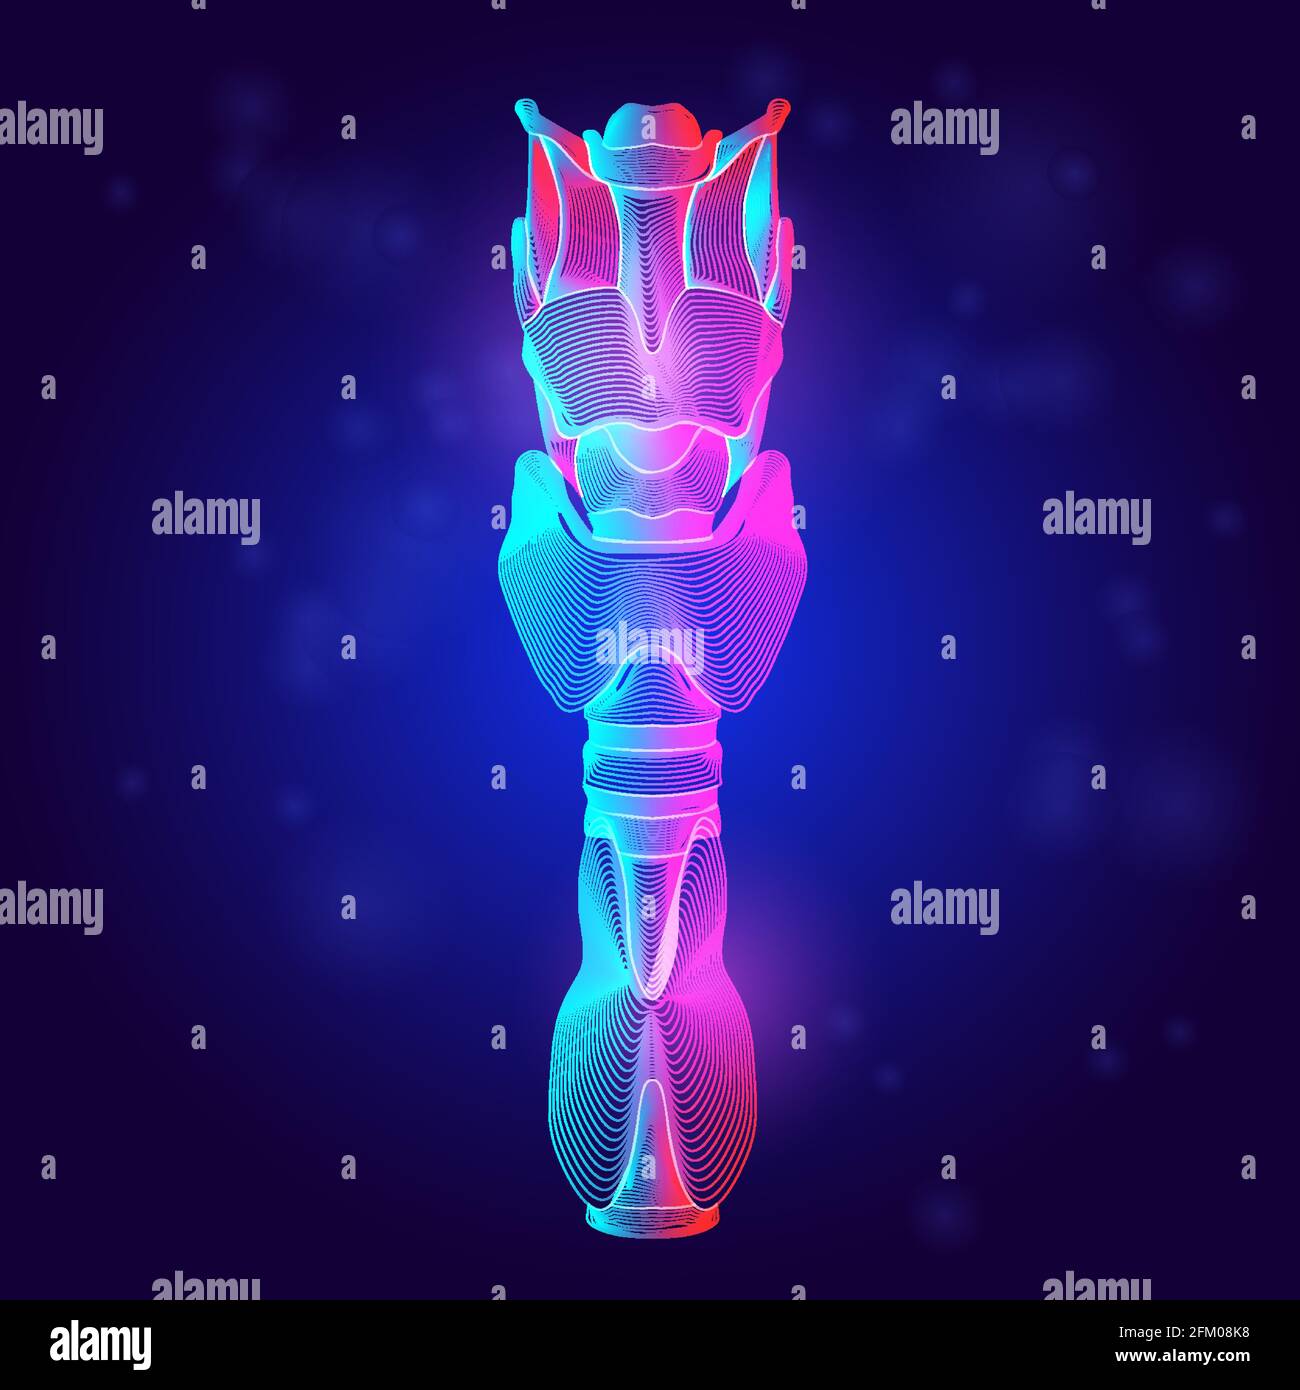 Human trachea medical structure. Outline vector illustration of the hyoid bone and thyroid cartilage organ anatomy in 3d line art style on neon abstra Stock Vector